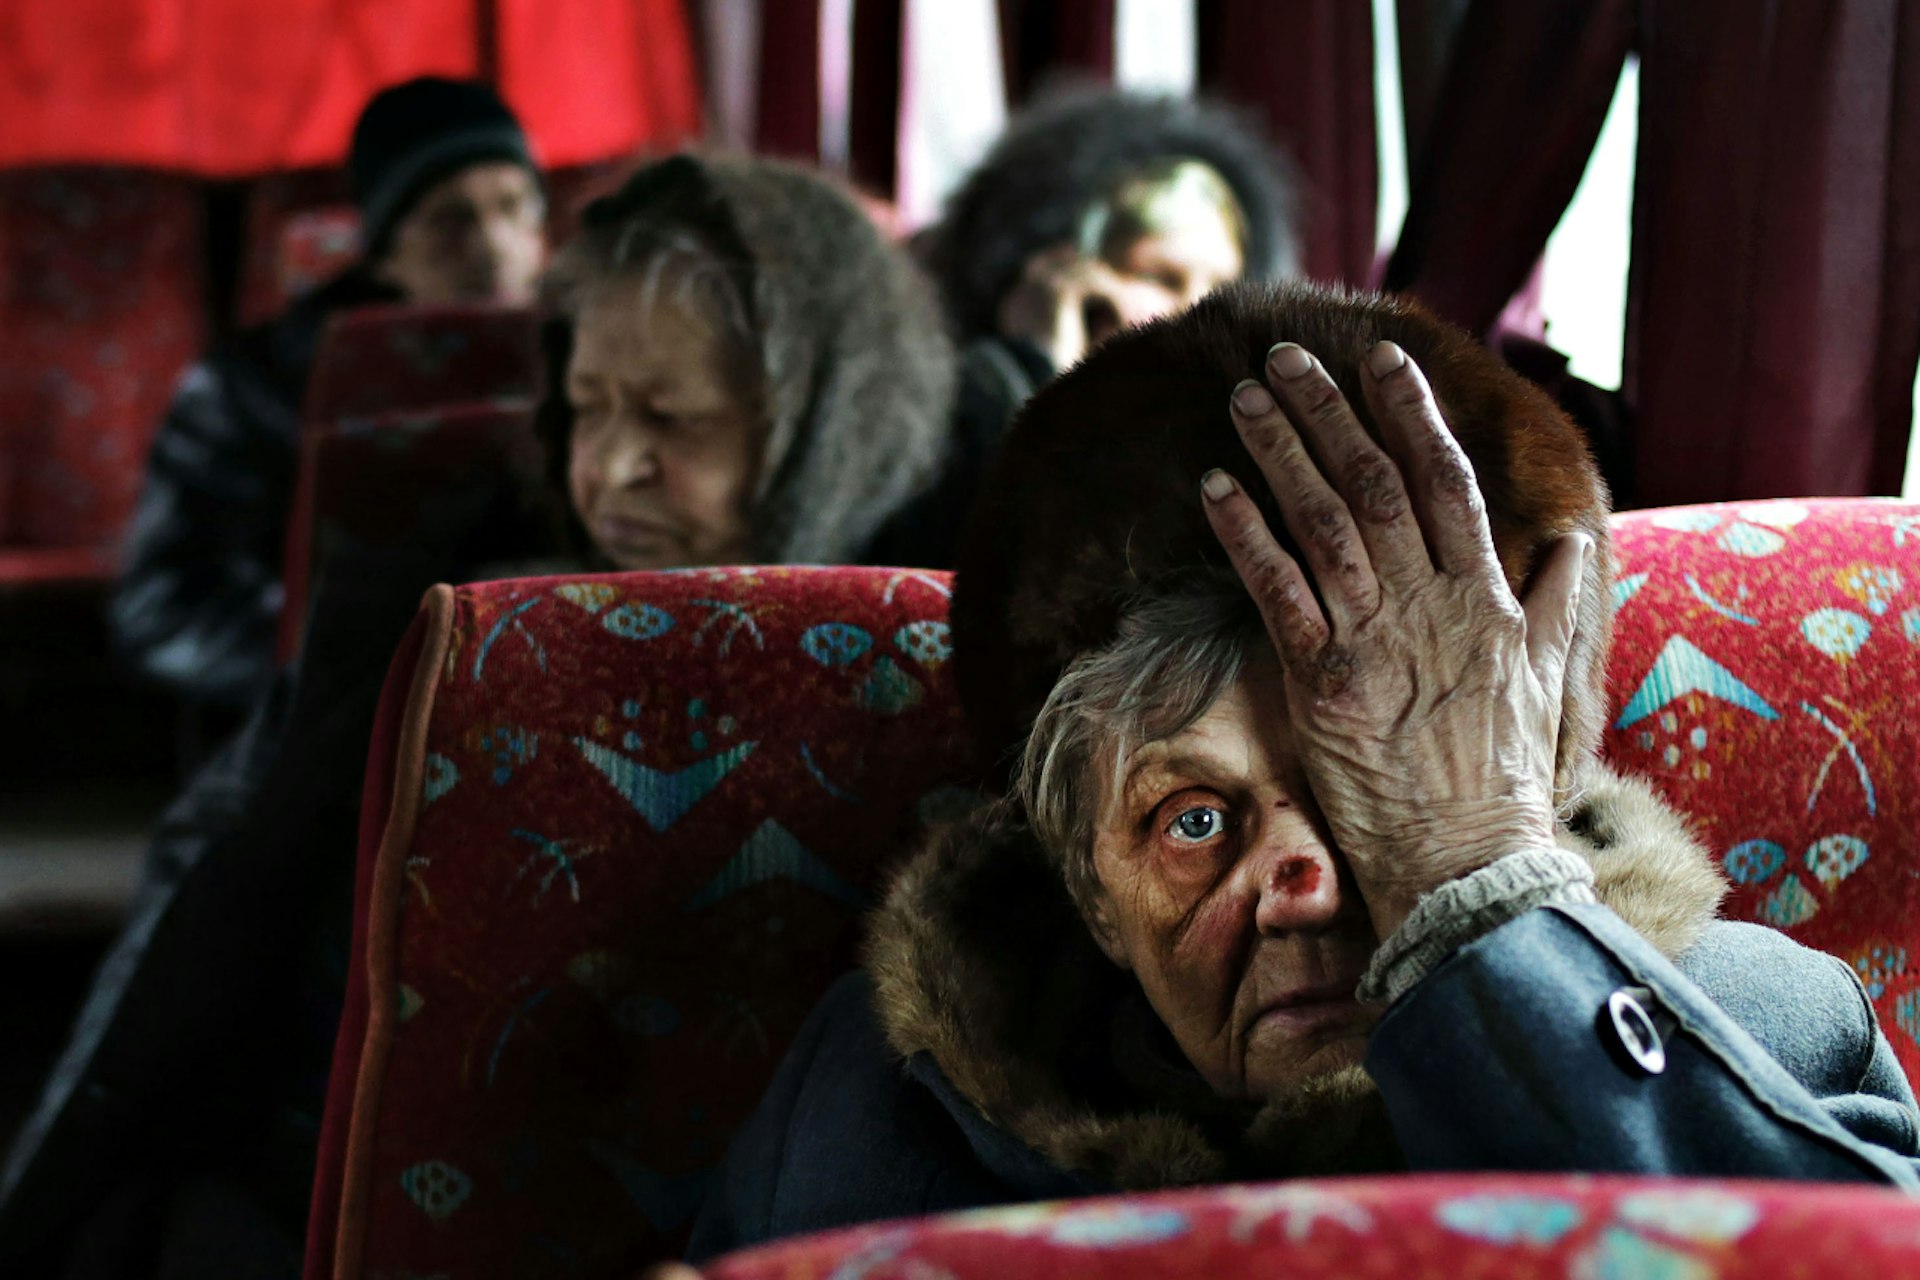 Ukraine in turmoil, seen through the eyes of a young local photographer